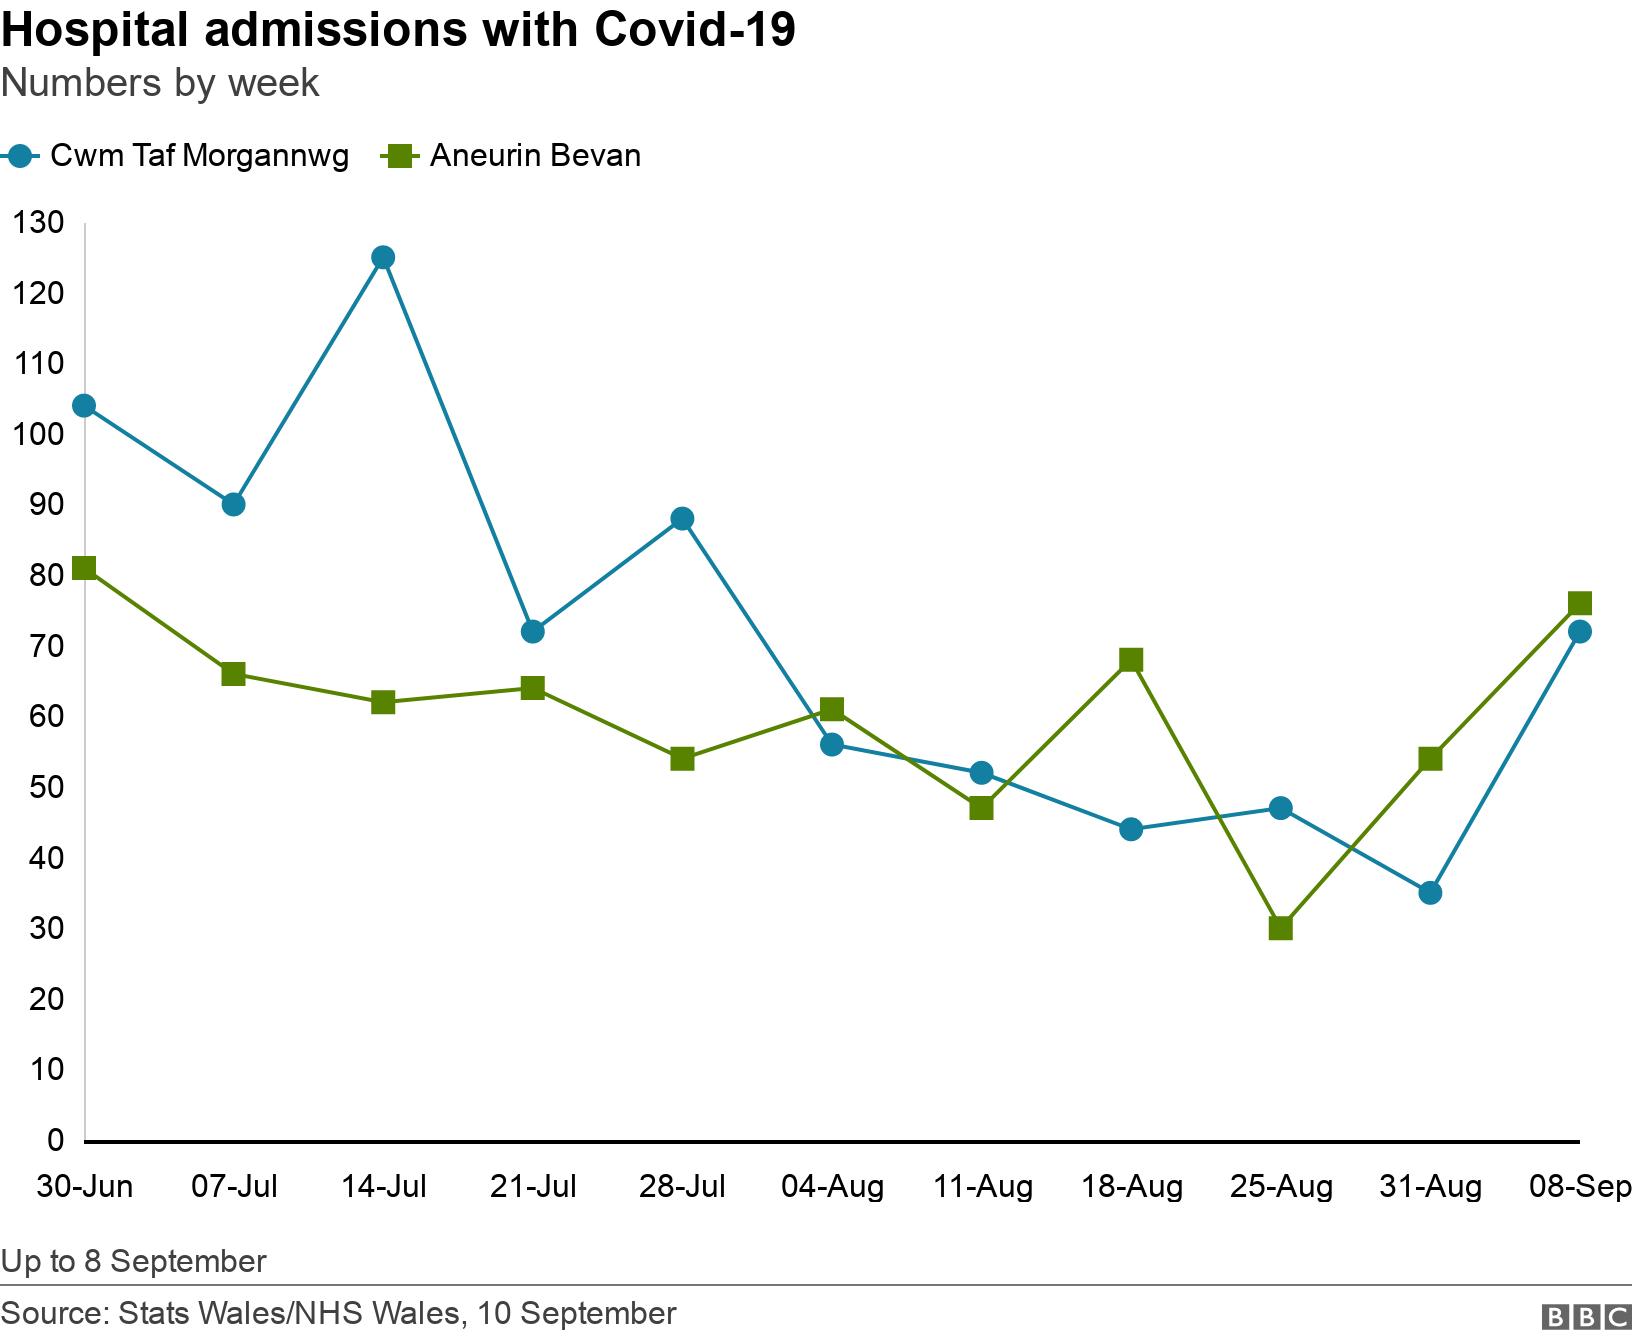 Hospital admissions with Covid-19. Numbers by week.  Up to 8 September.